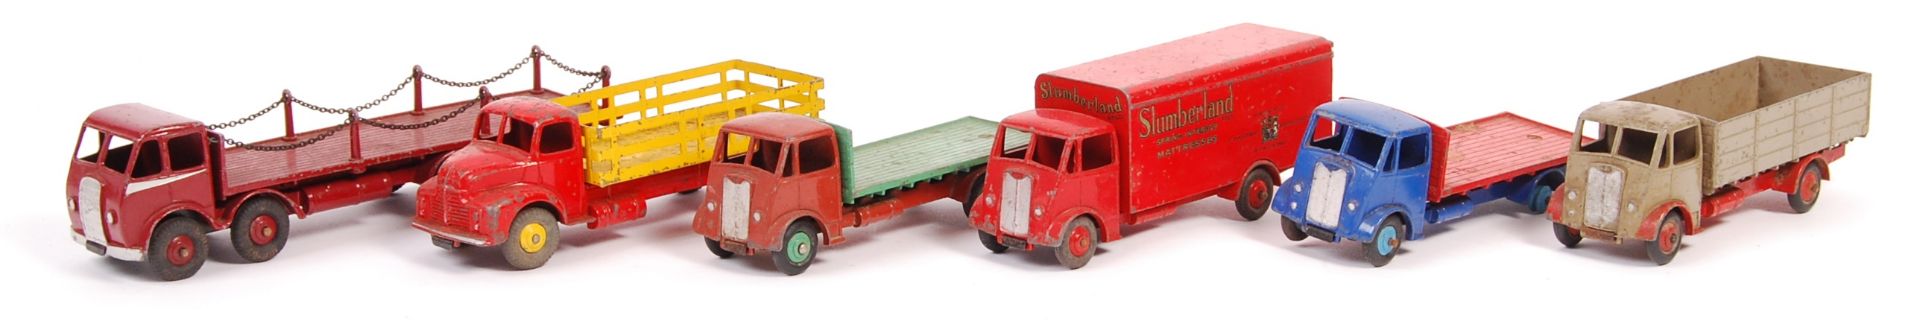 GOOD COLLECTION OF VINTAGE DINKY TOYS FODENS & VANS